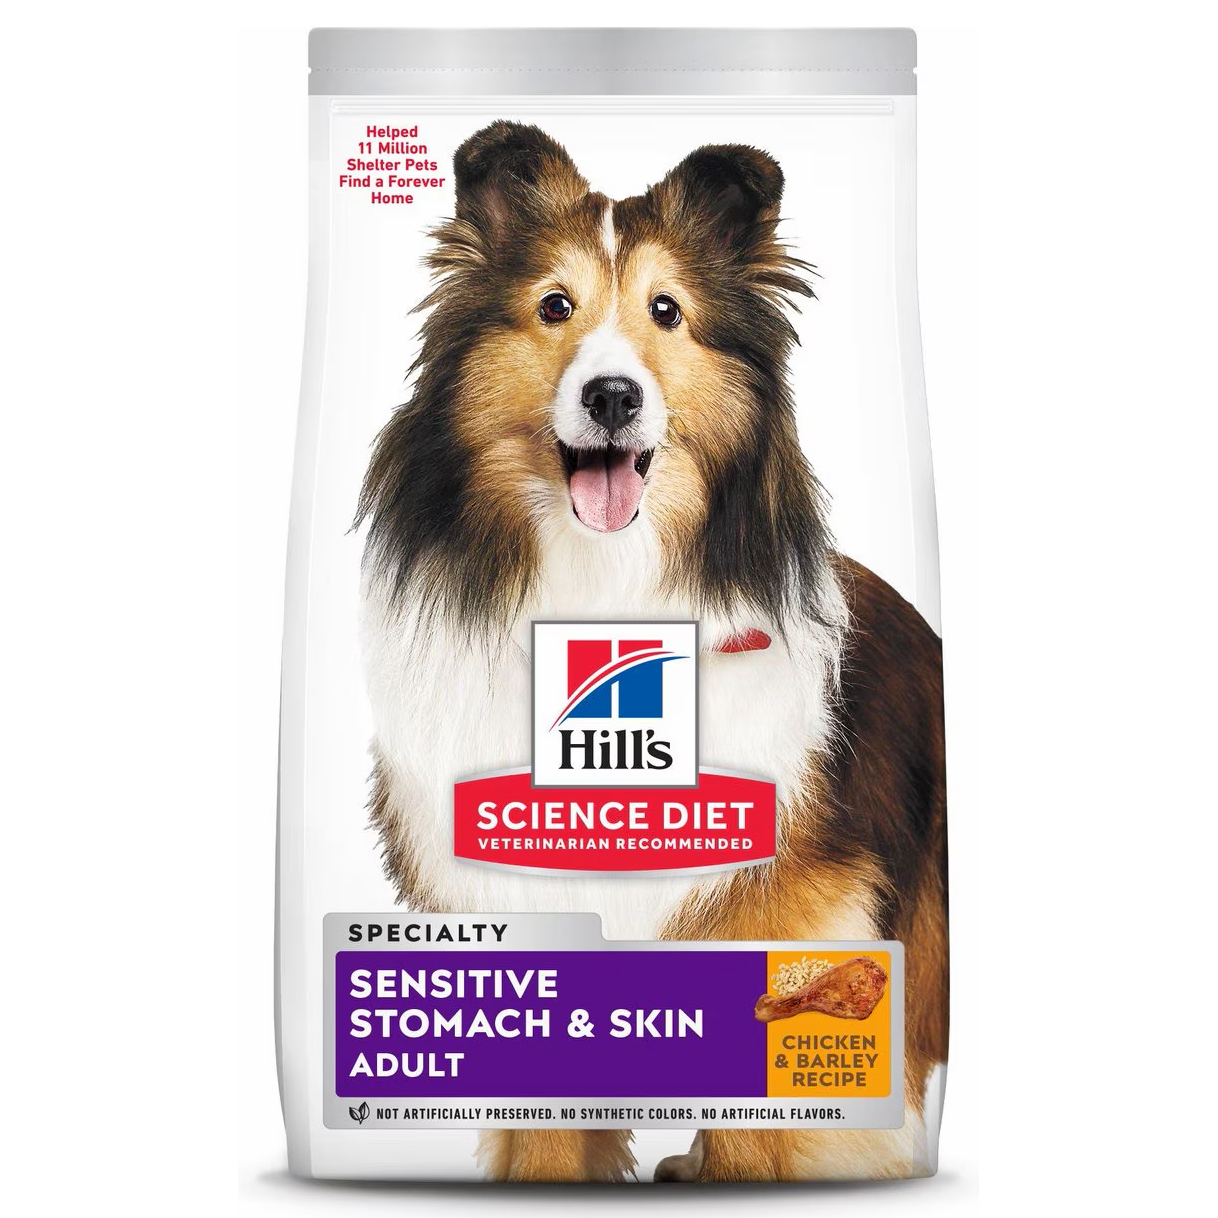 Hill’s Science Diet Adult Sensitive Stomach & Skin Dry Food